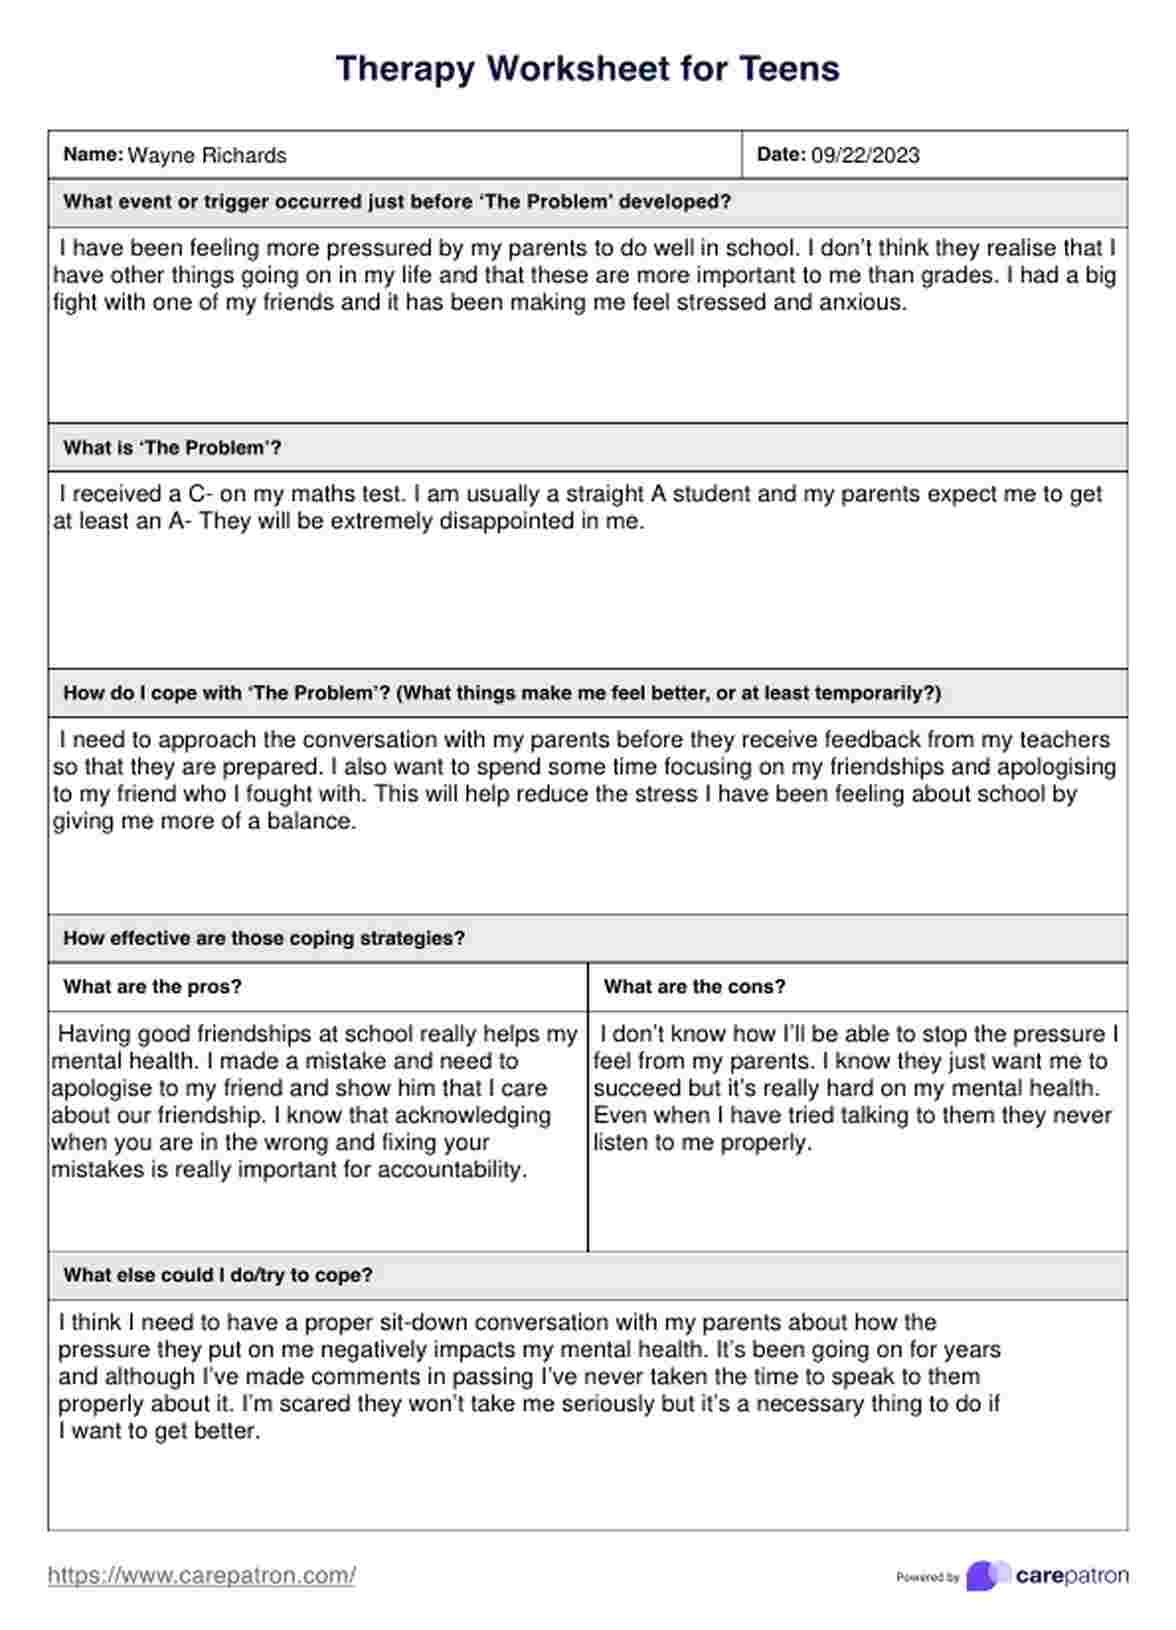 Therapy Worksheet For Teens PDF Example